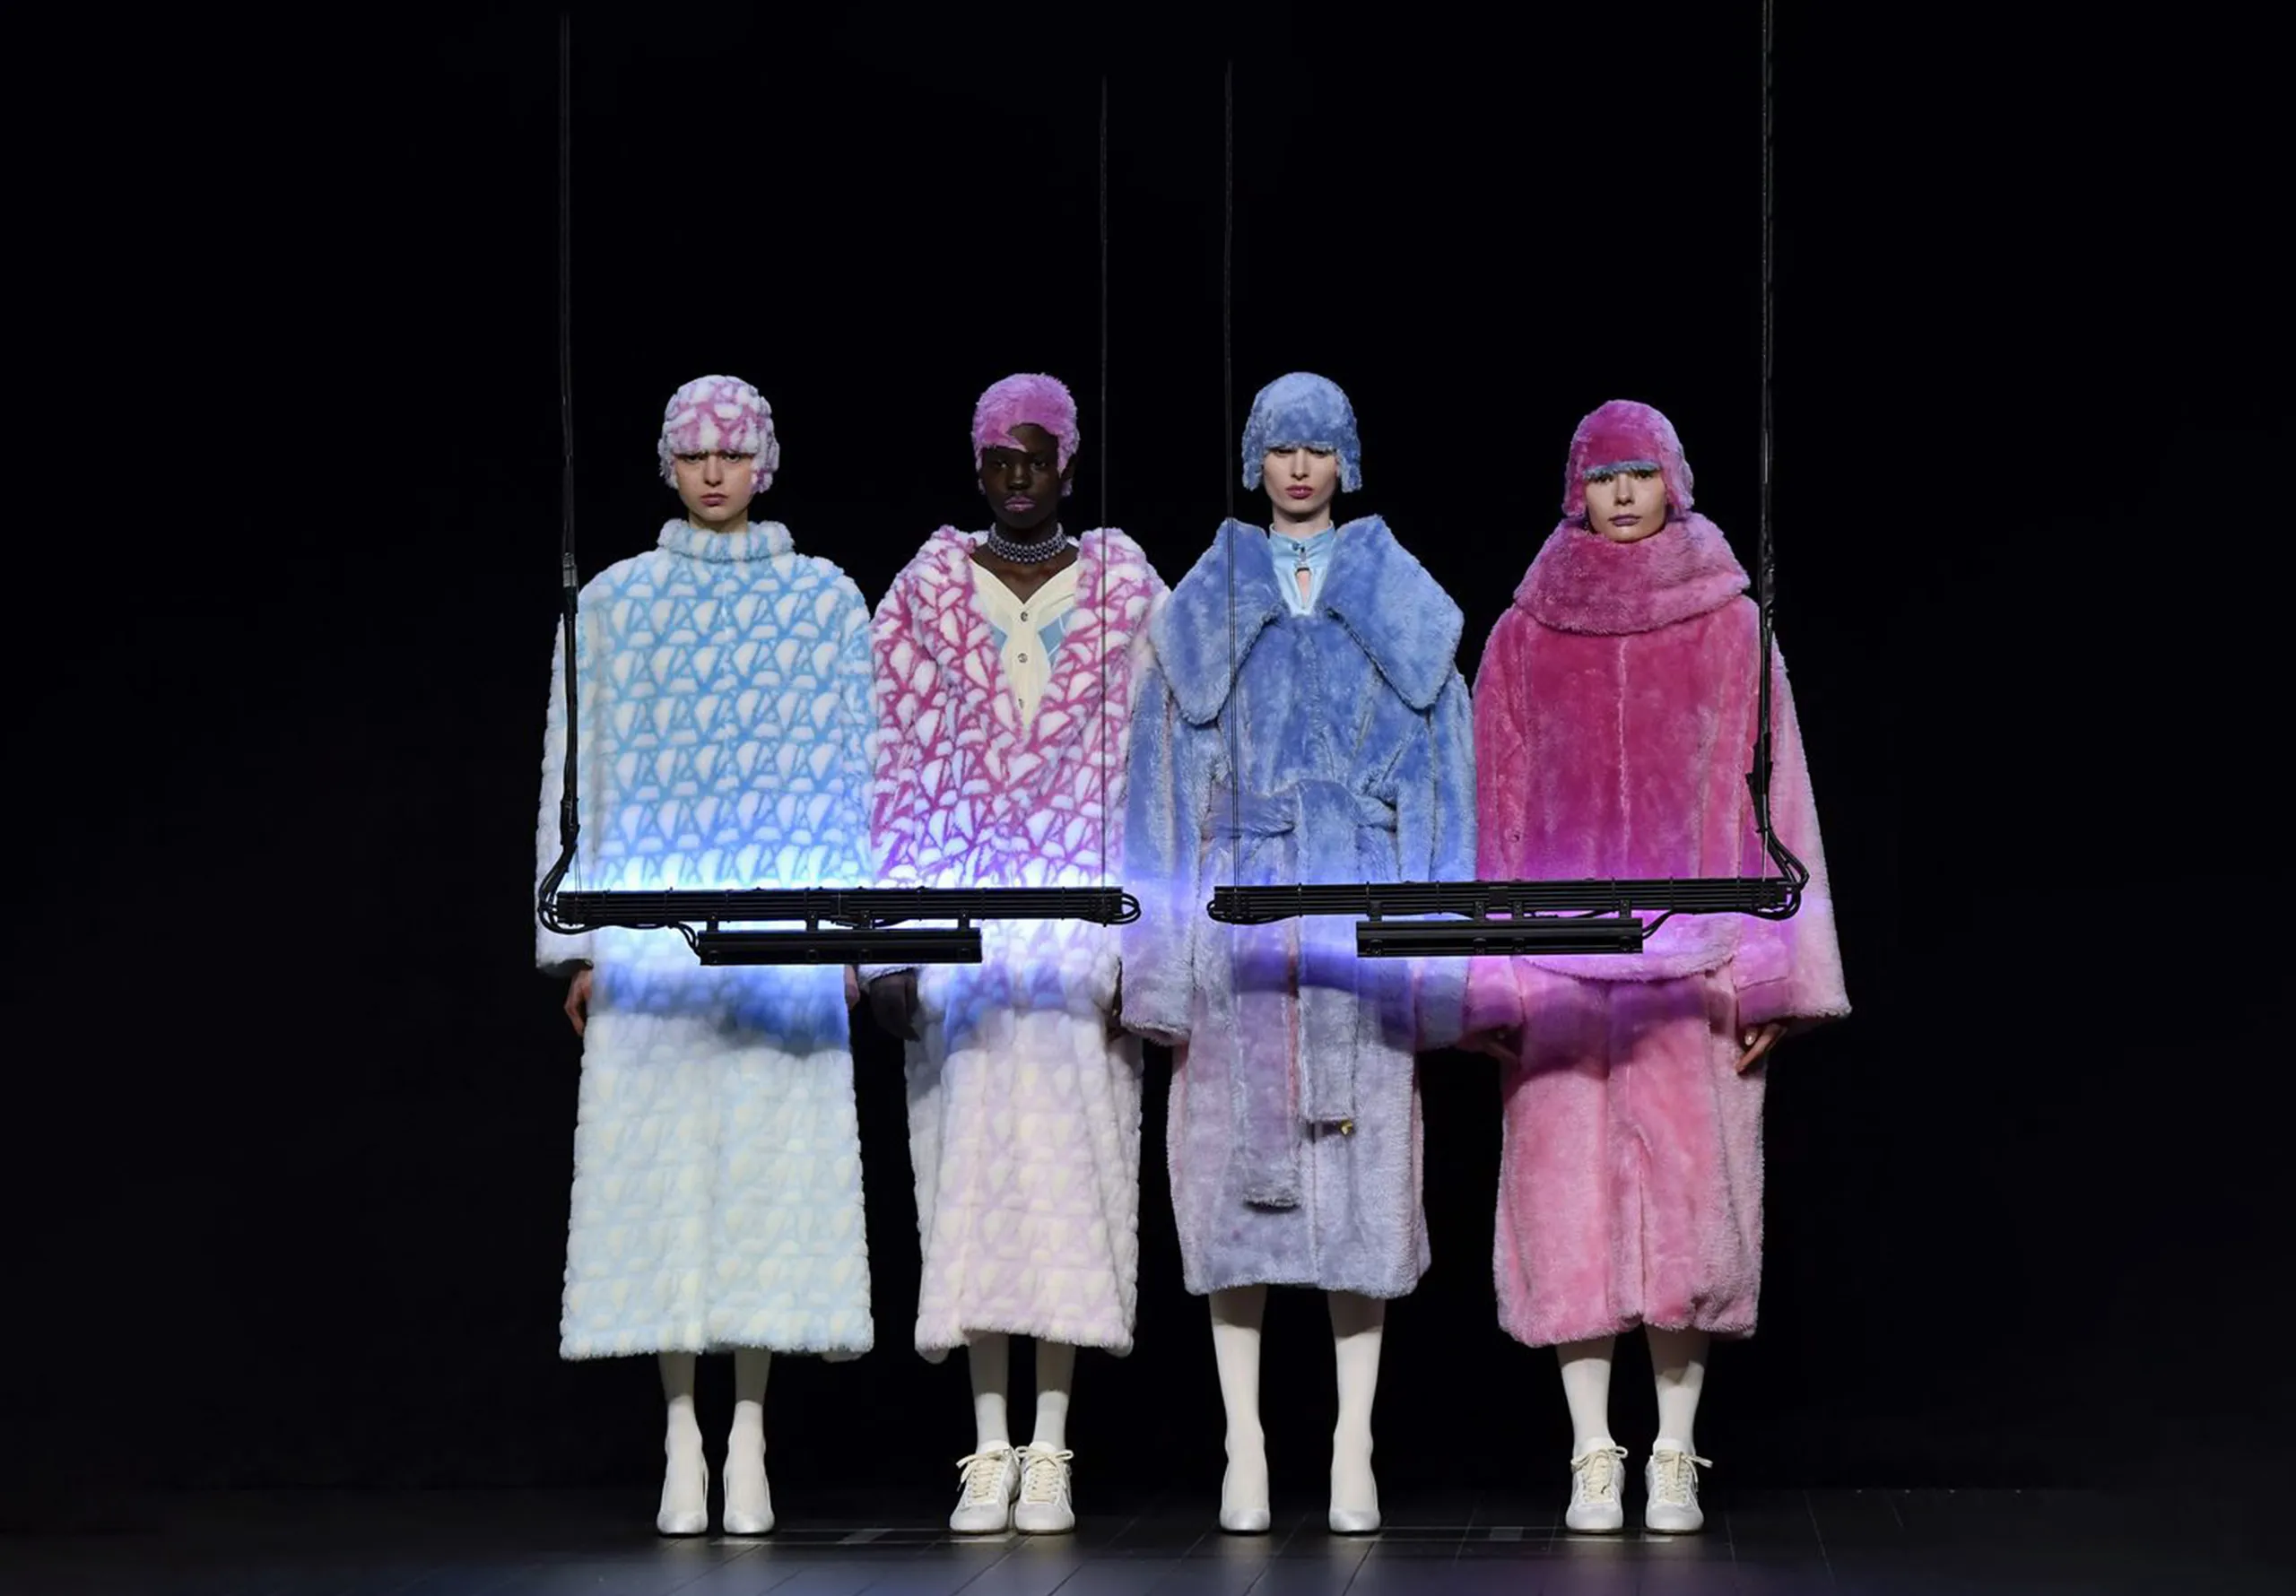 A colour-changing fashion collection, activated by suspended UV lights